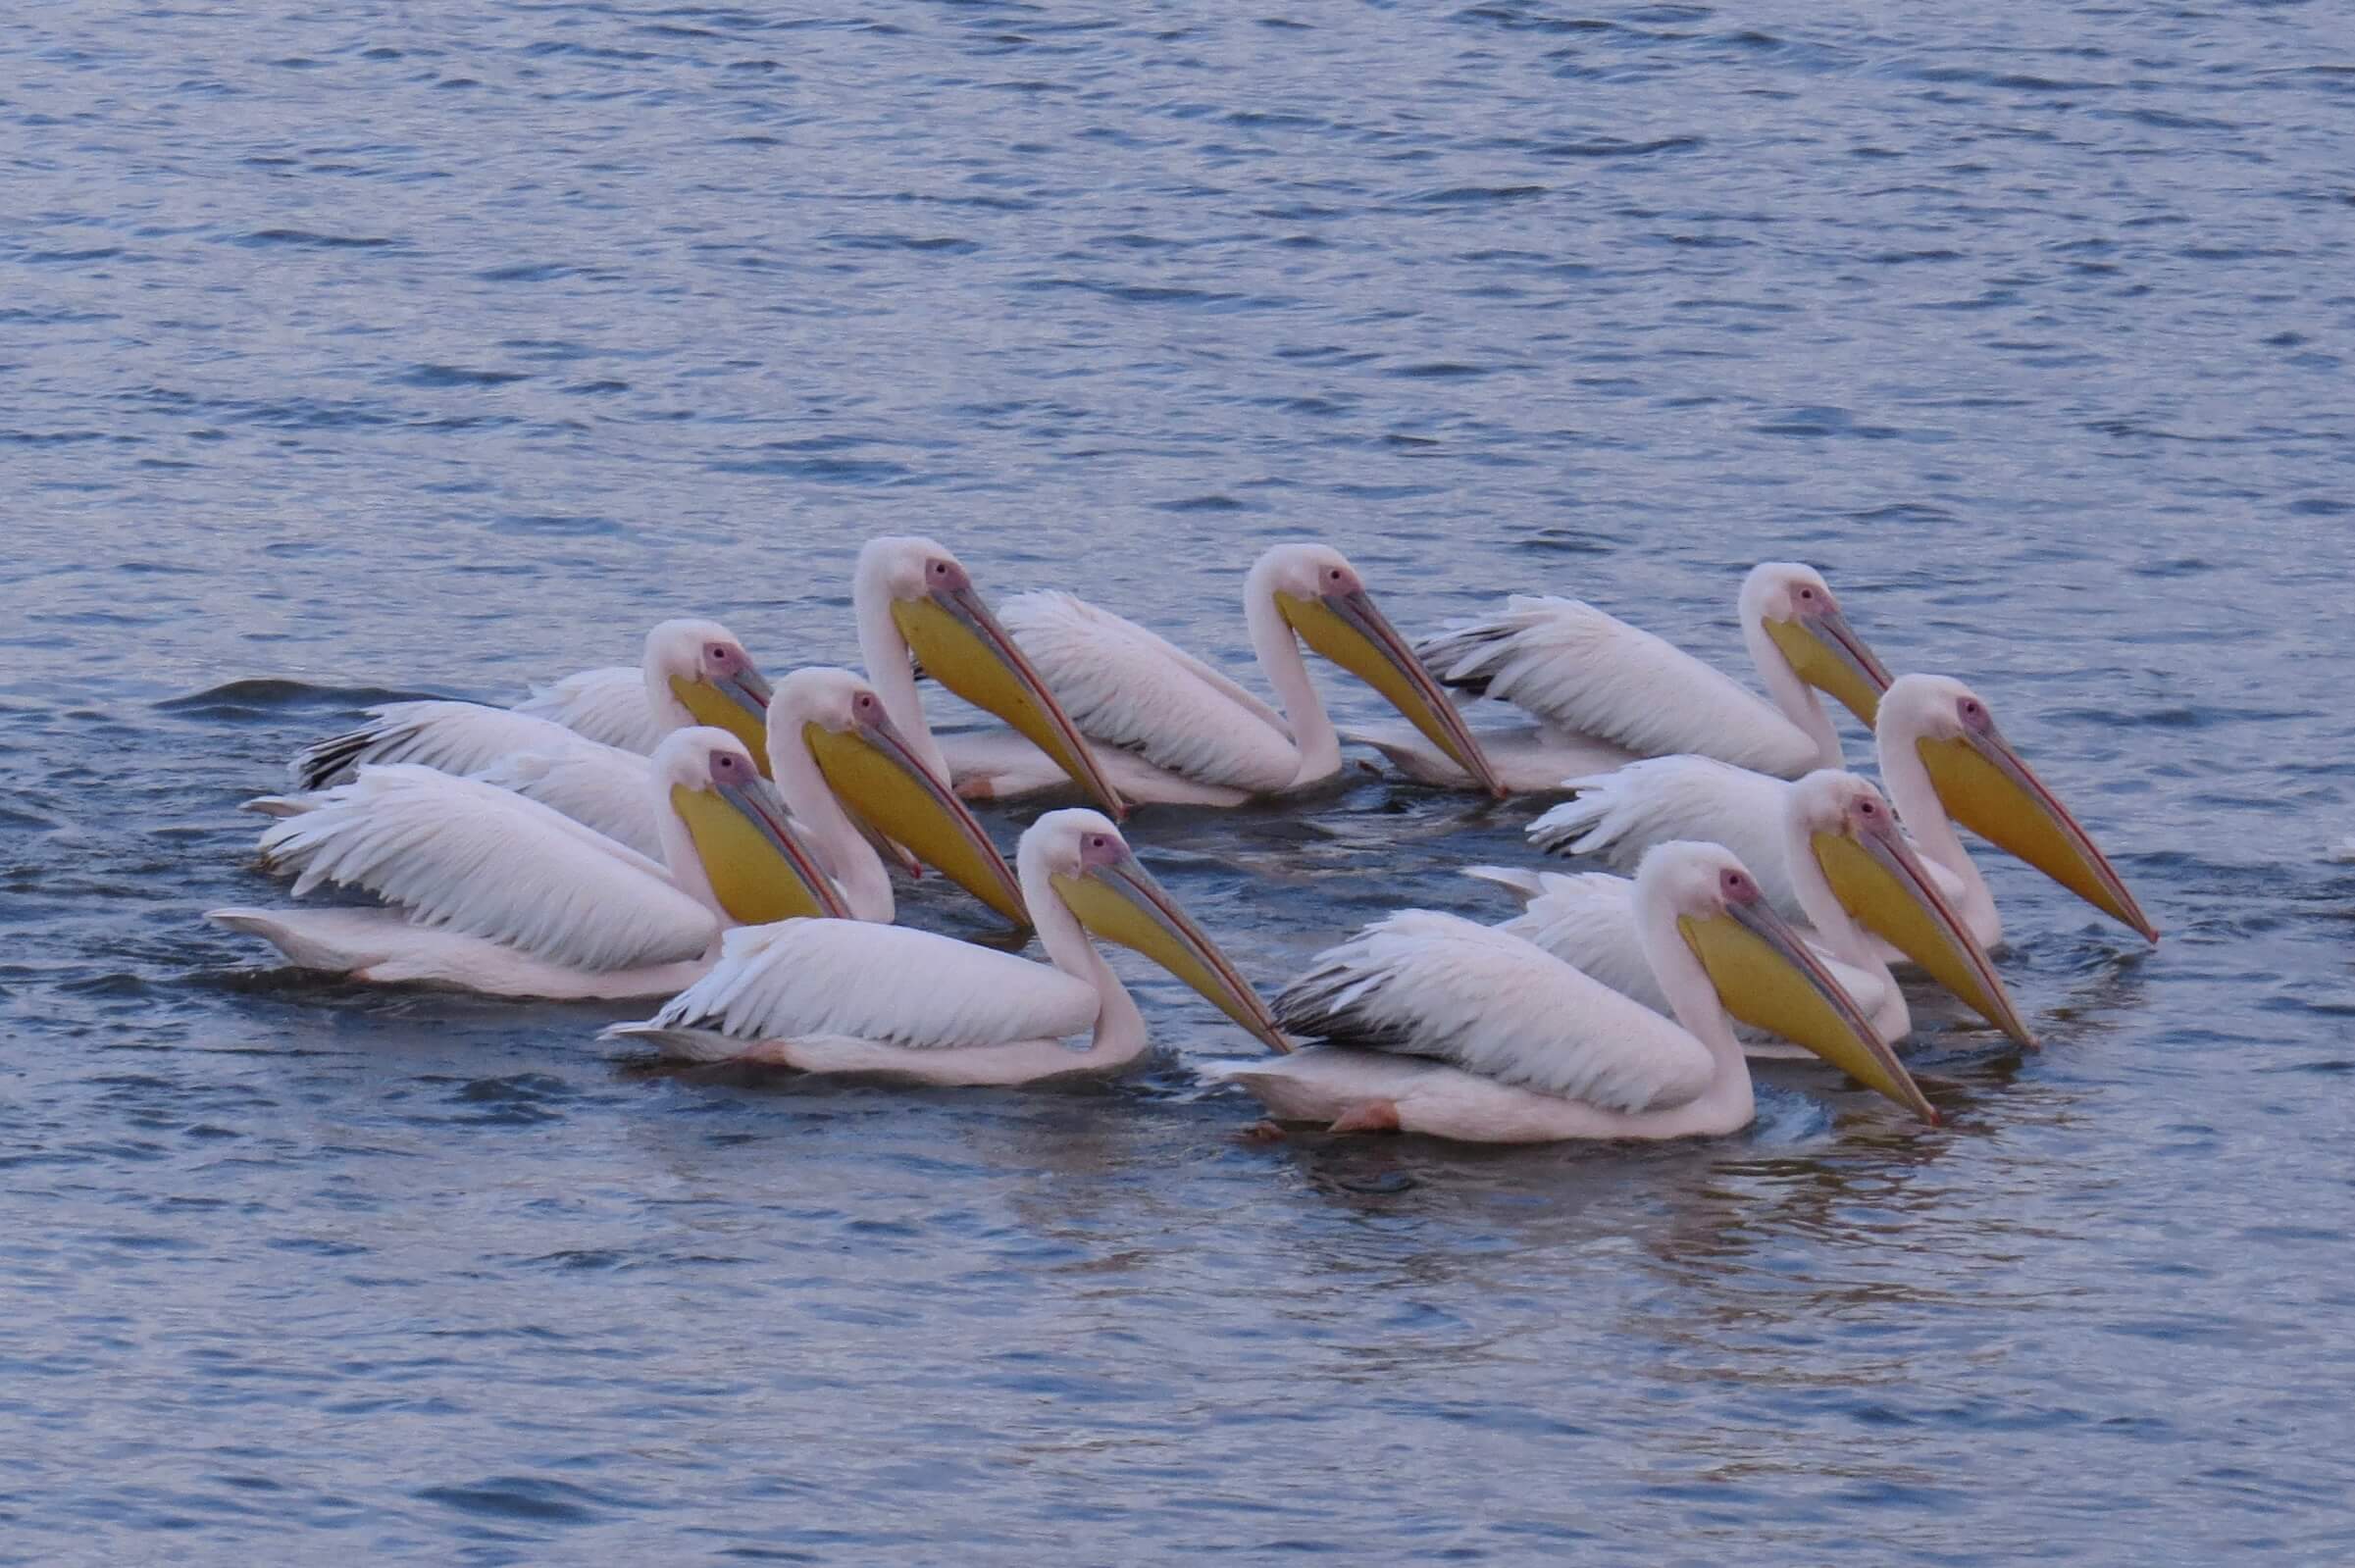 The success of the model can improve the study of bird migration. Pelicans, photo: Reot Alon